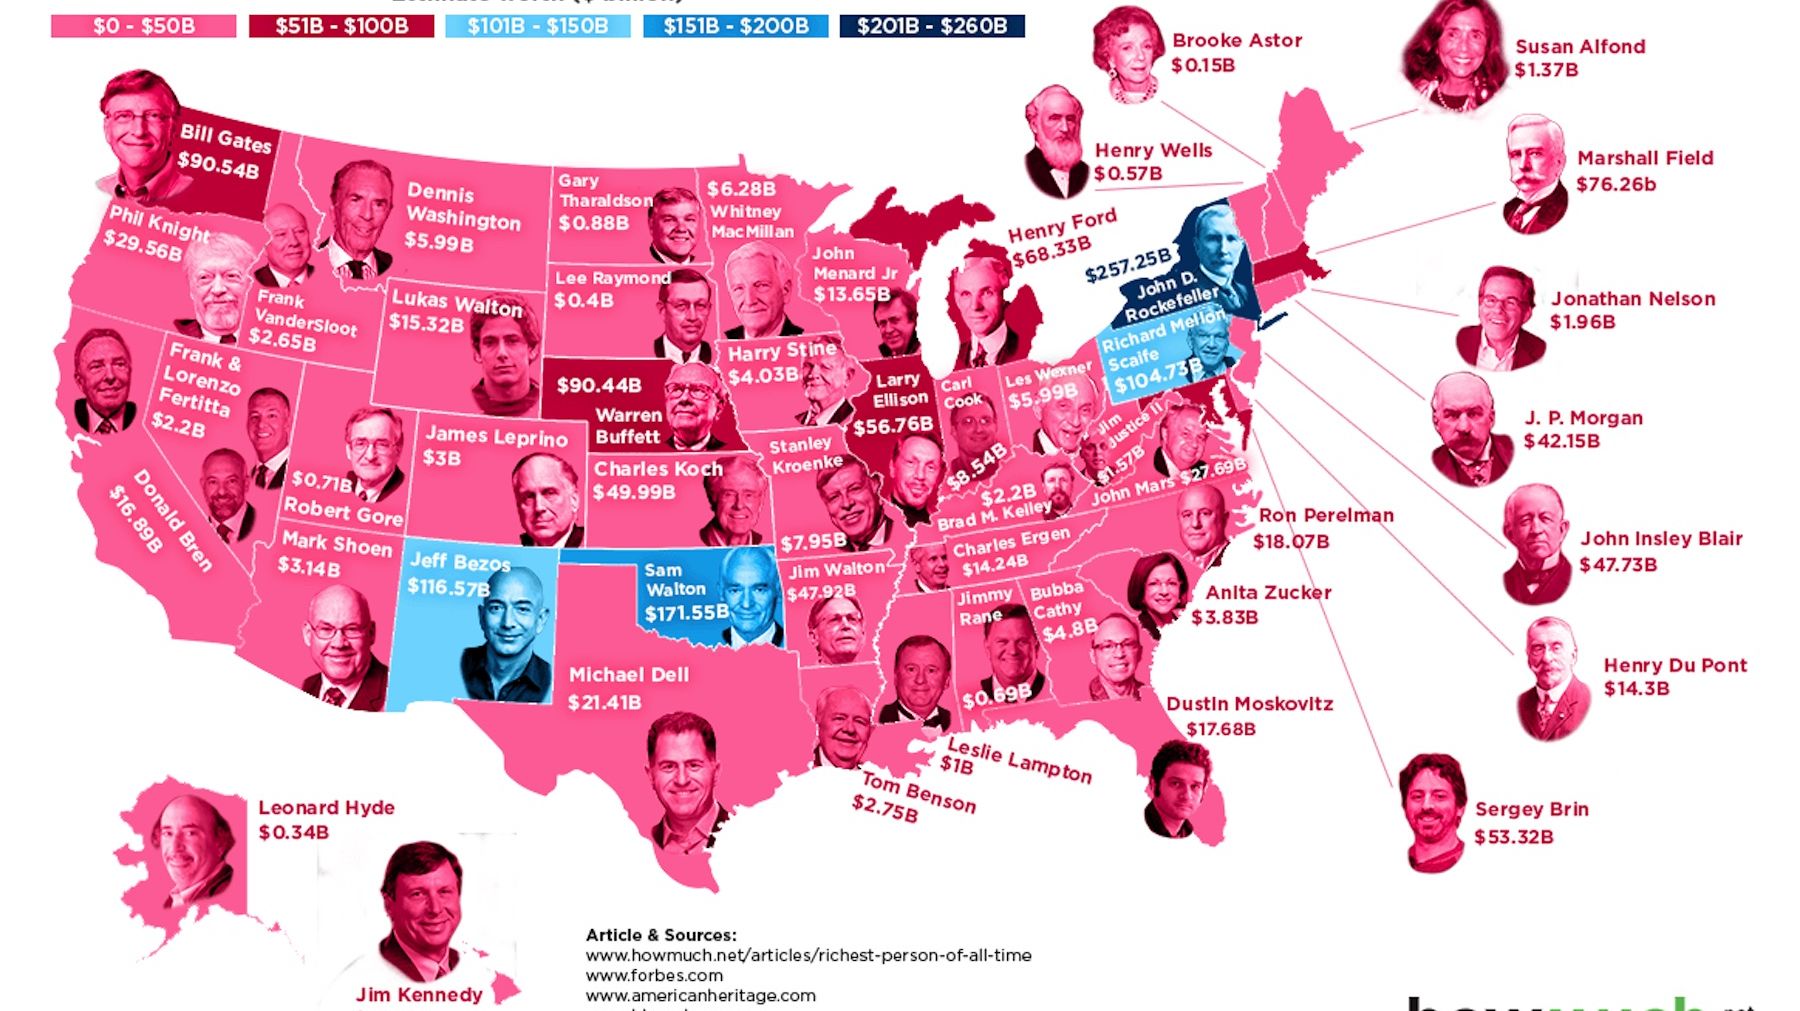 The Richest Person Of All Time From Each State Mental Floss 1078